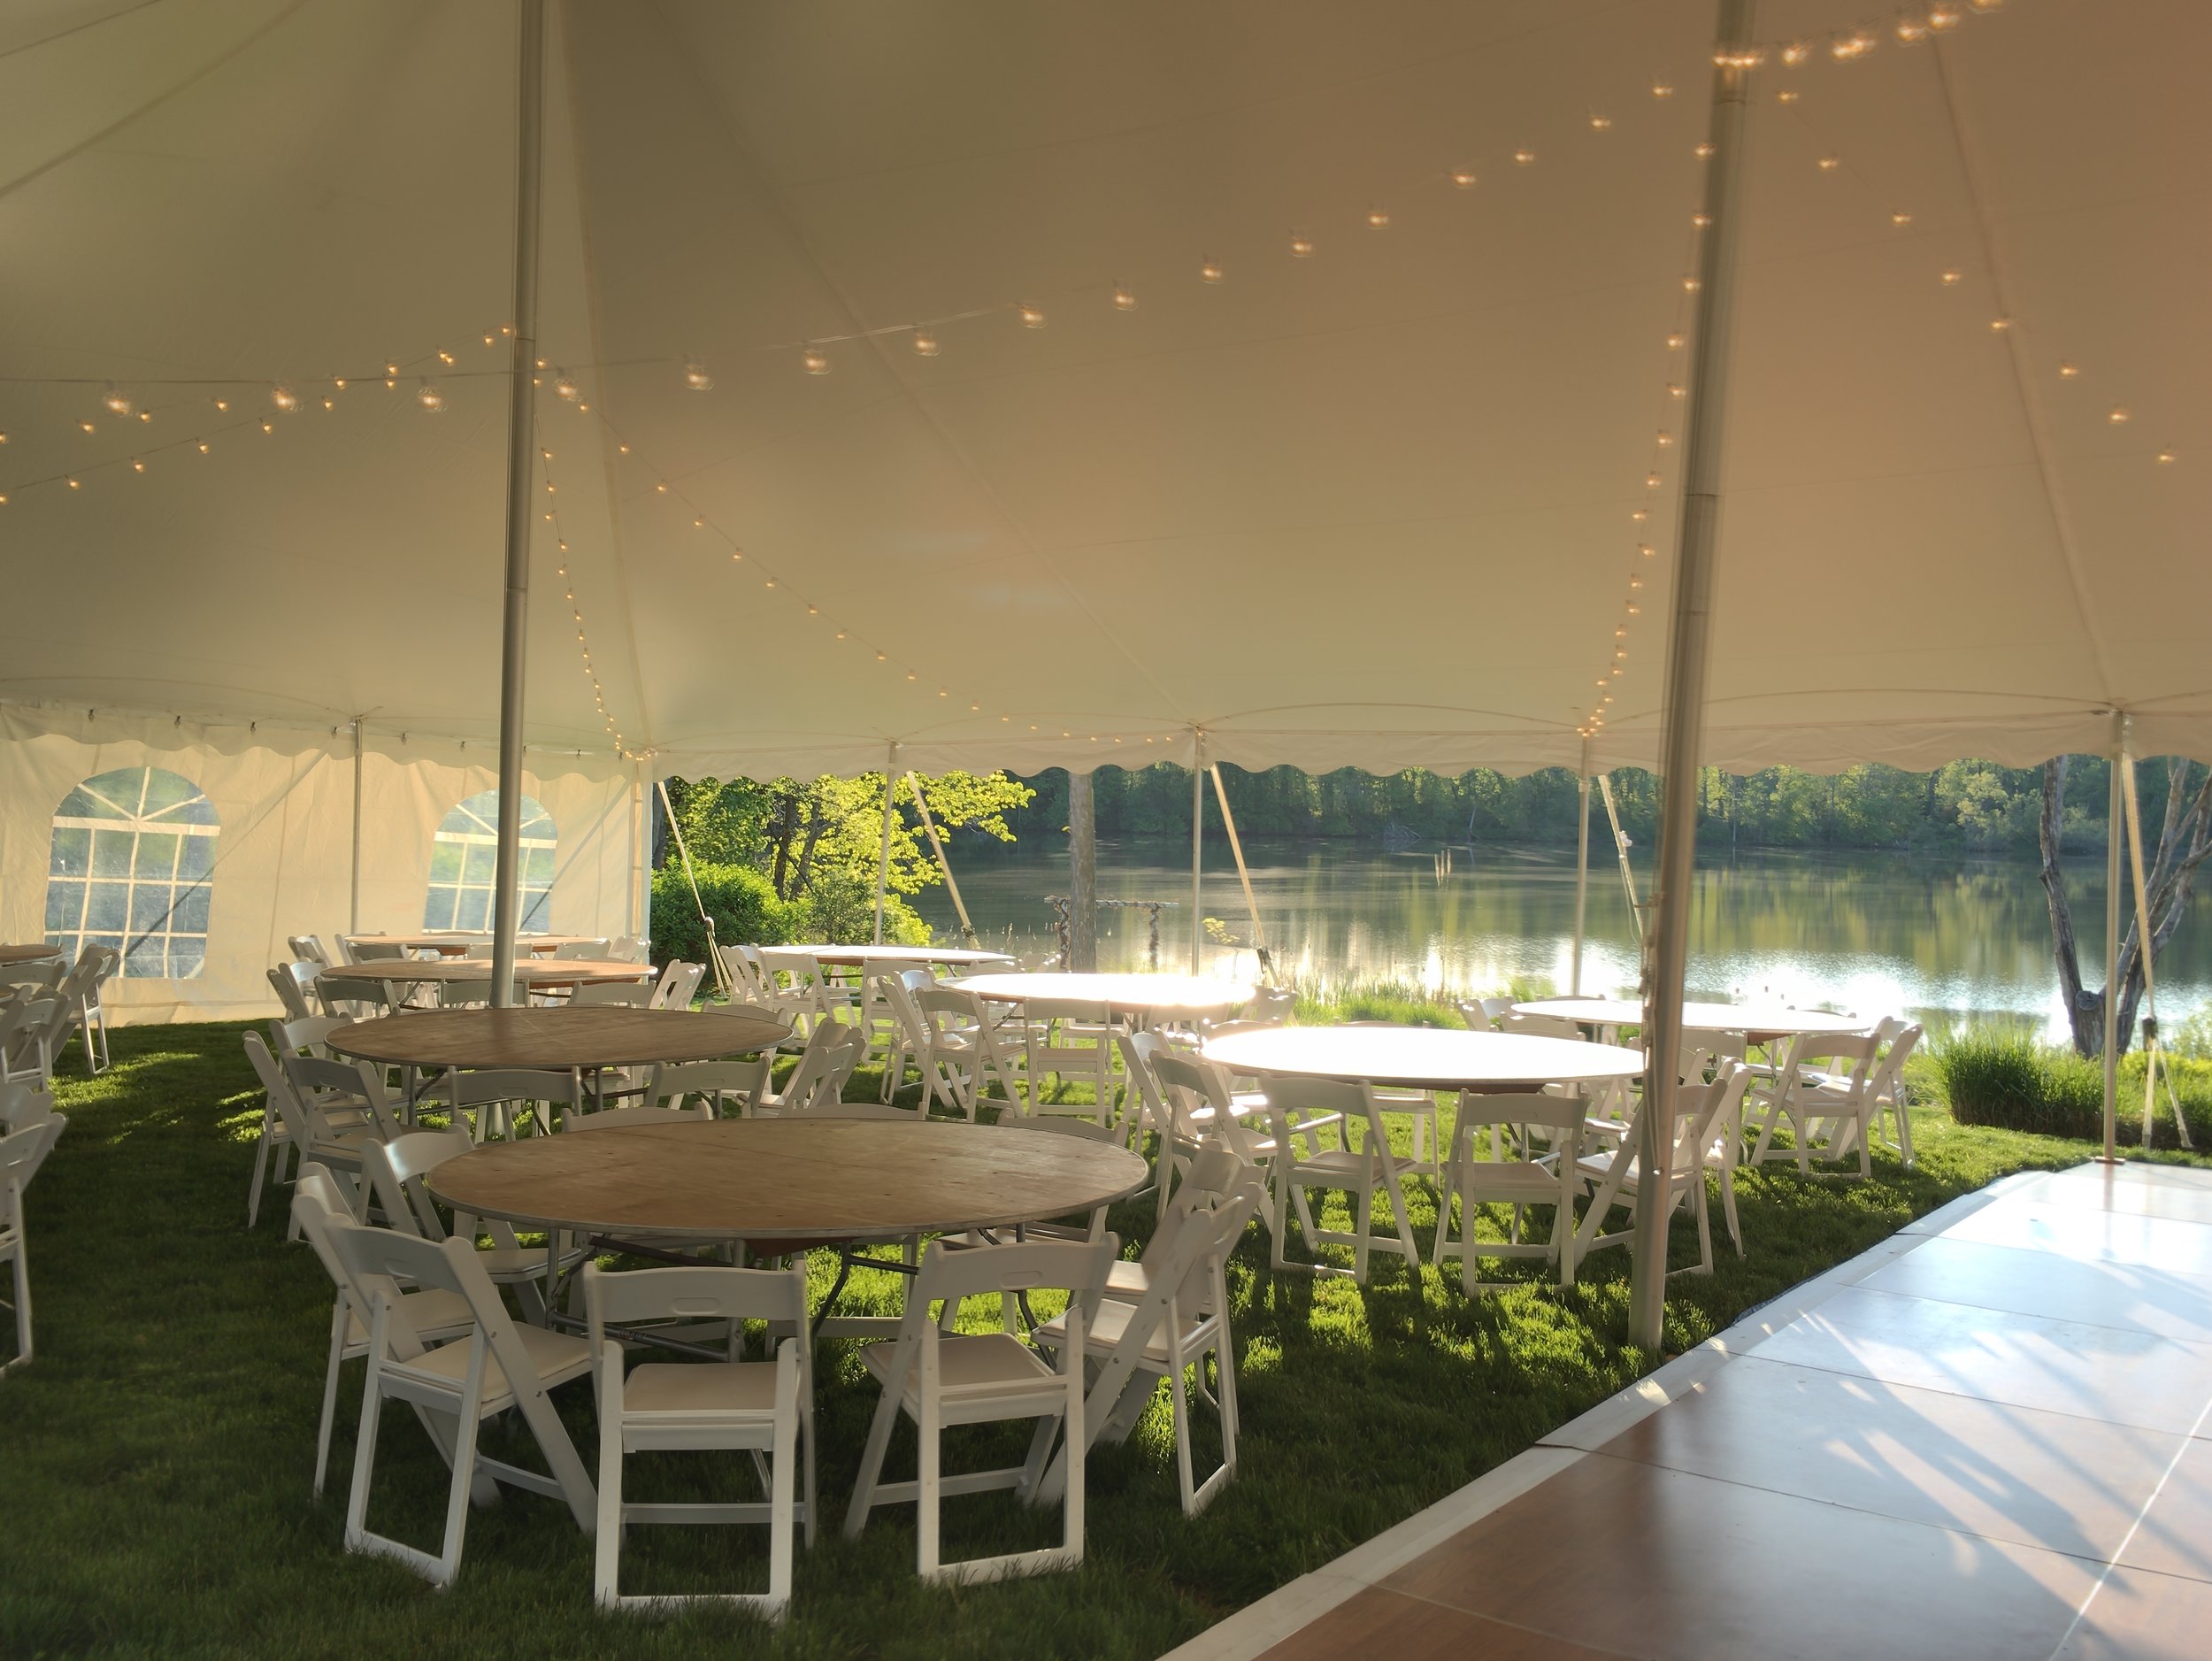 cafe lighting, dance floors, white padded chairs and round tables for your tent wedding